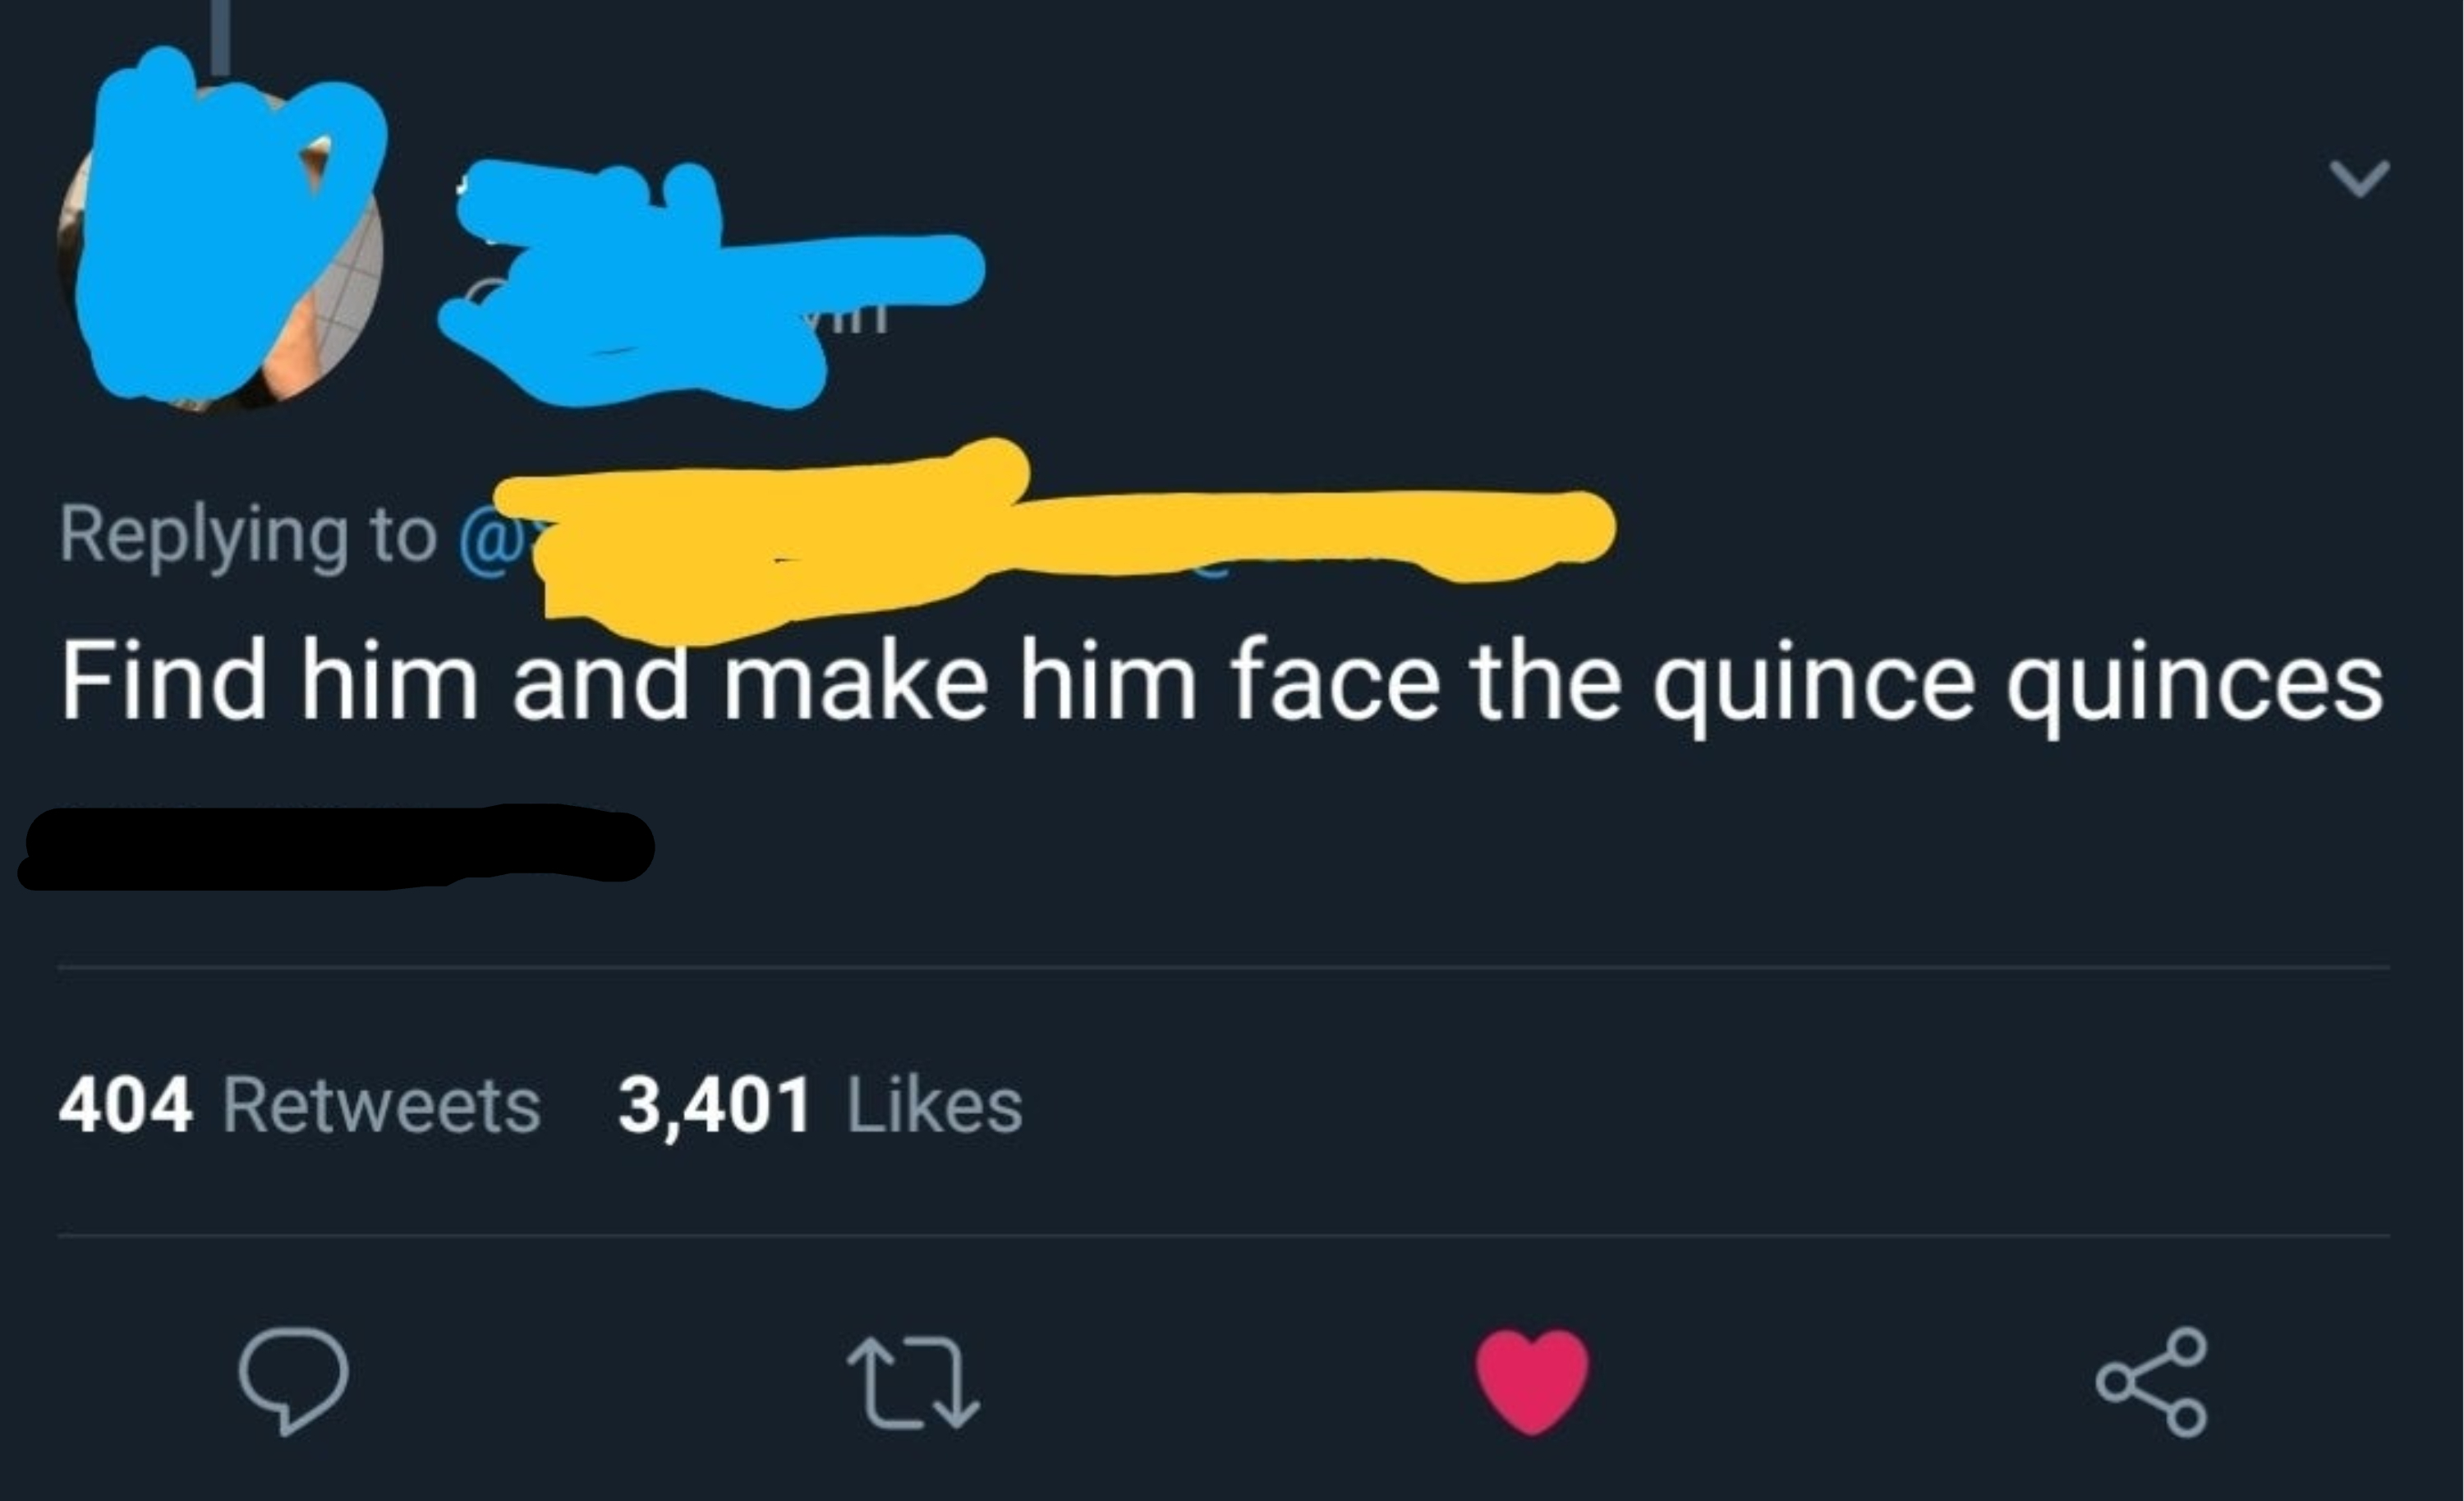 Summarized tweet: A user says to find someone &quot;and make him face the quince quinces&quot;